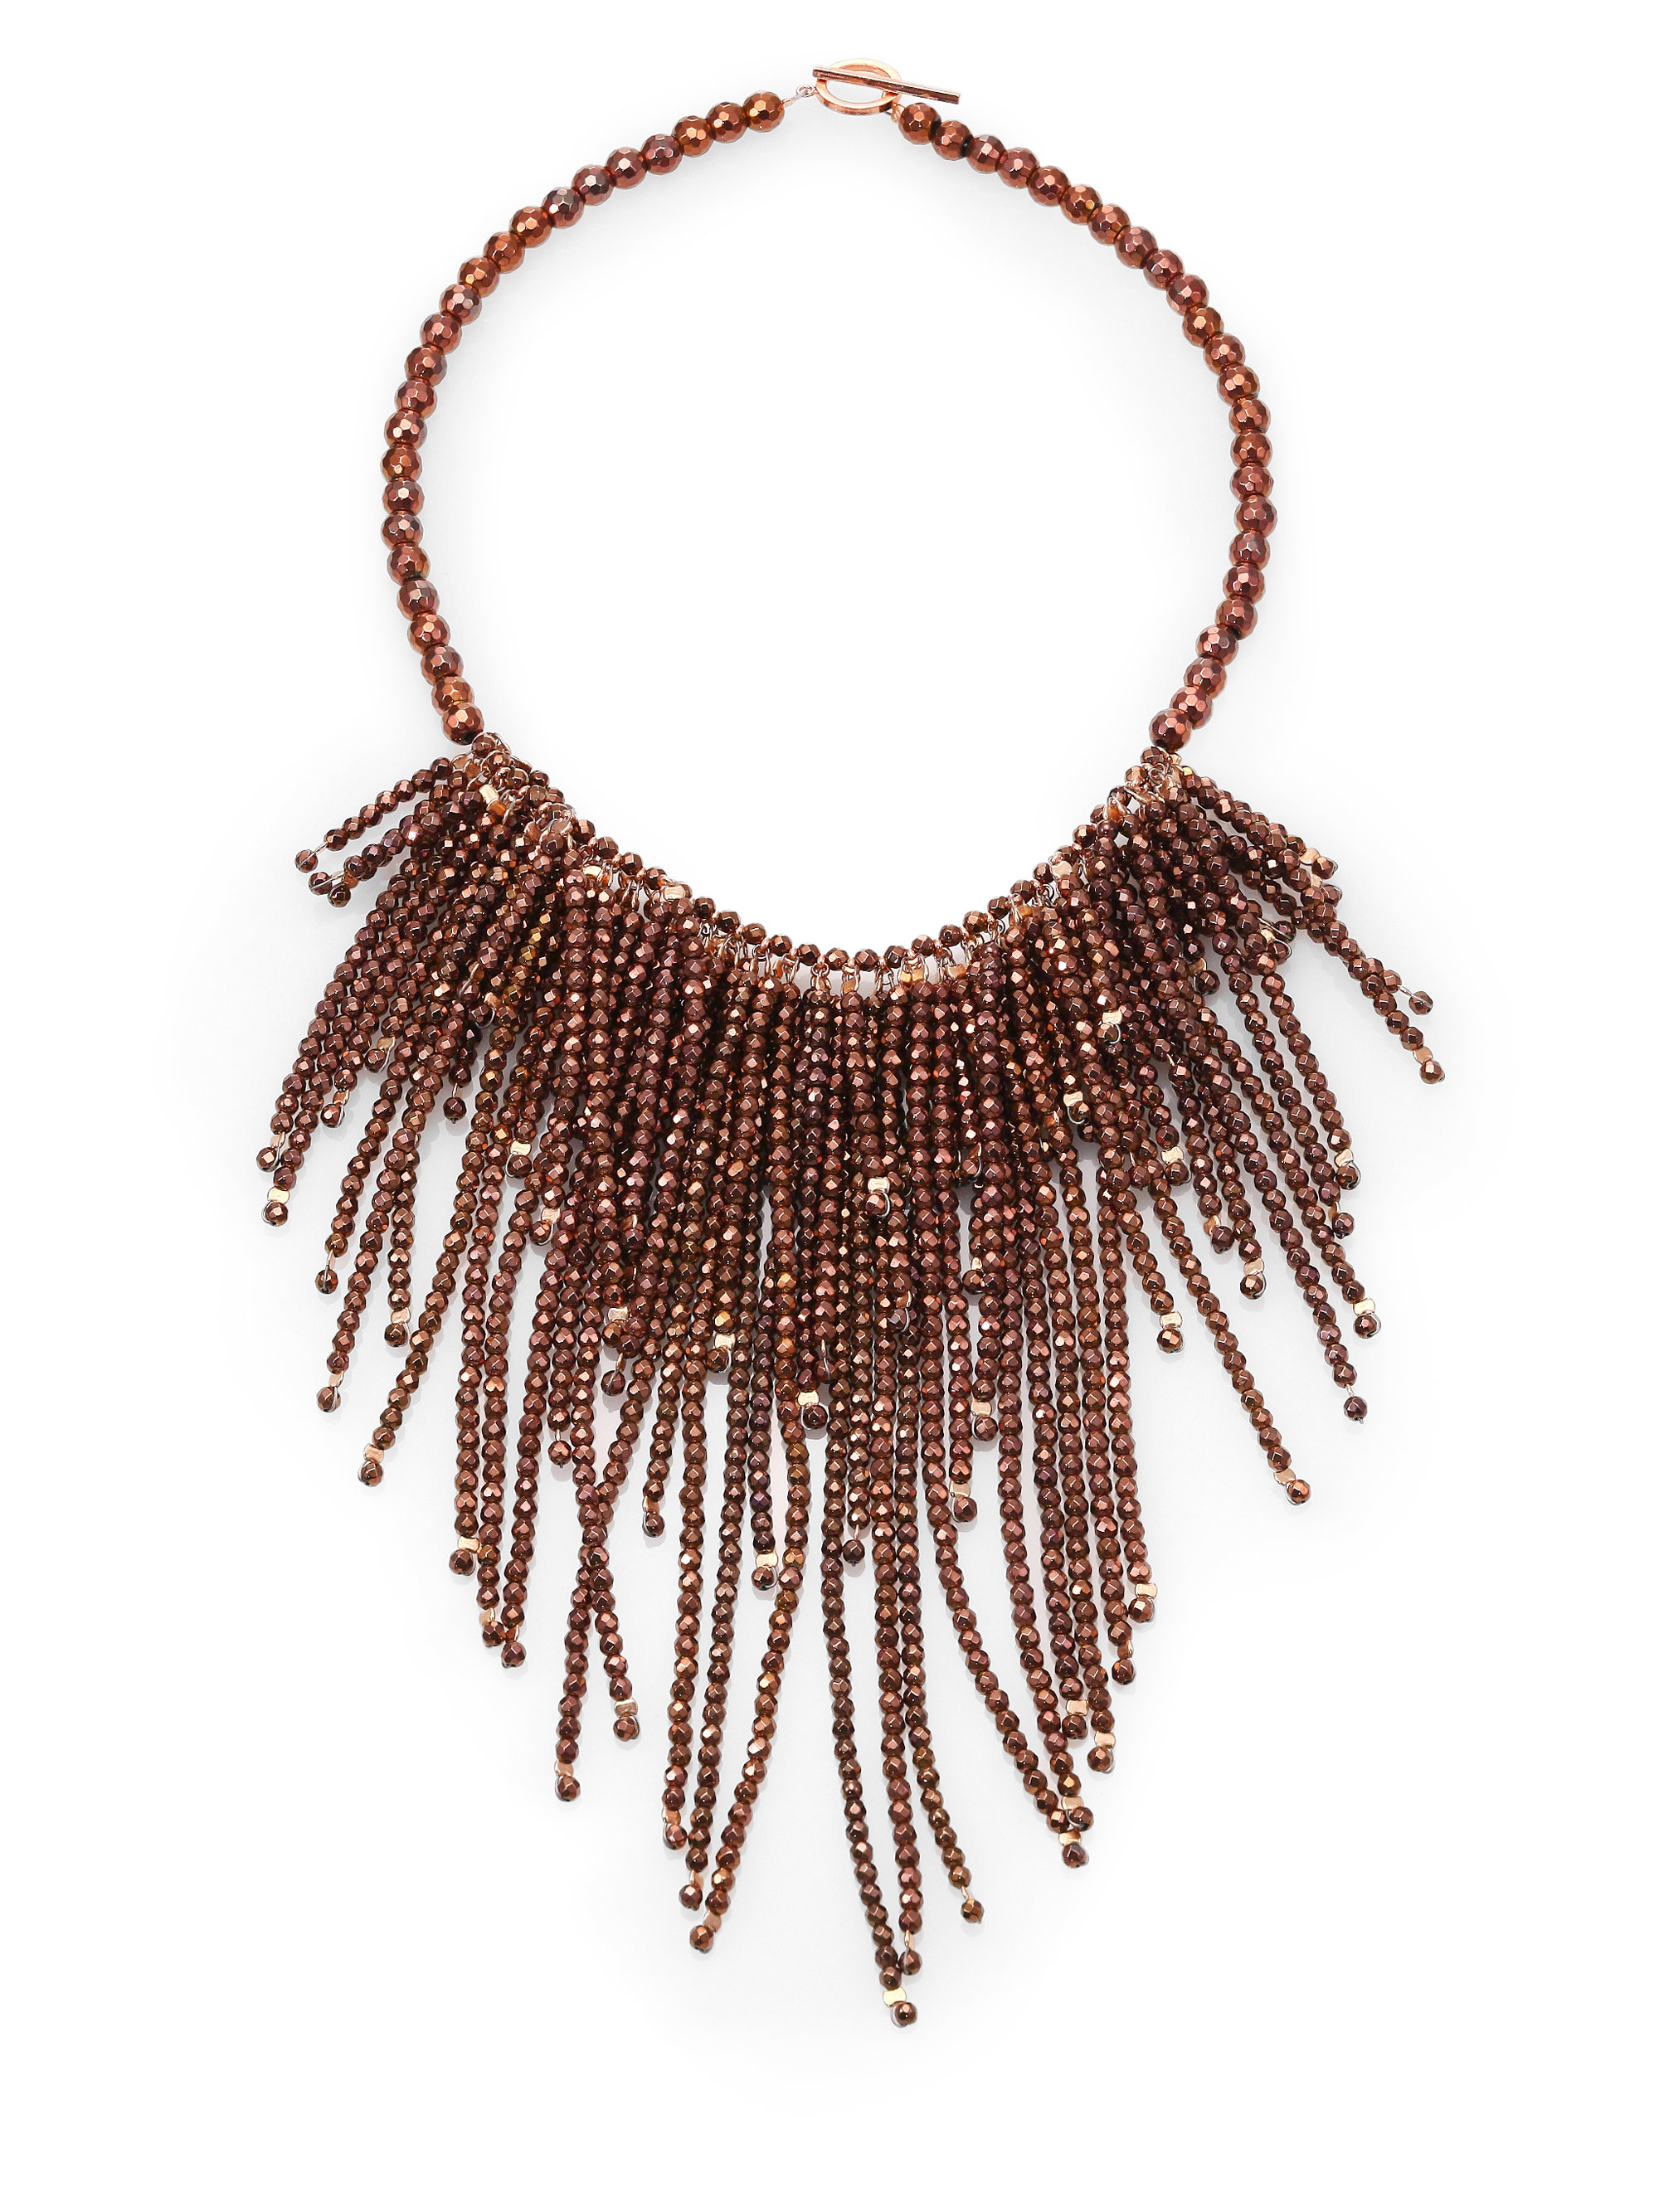 Brunello Cucinelli Beaded Fringe Necklace in Brown - Lyst